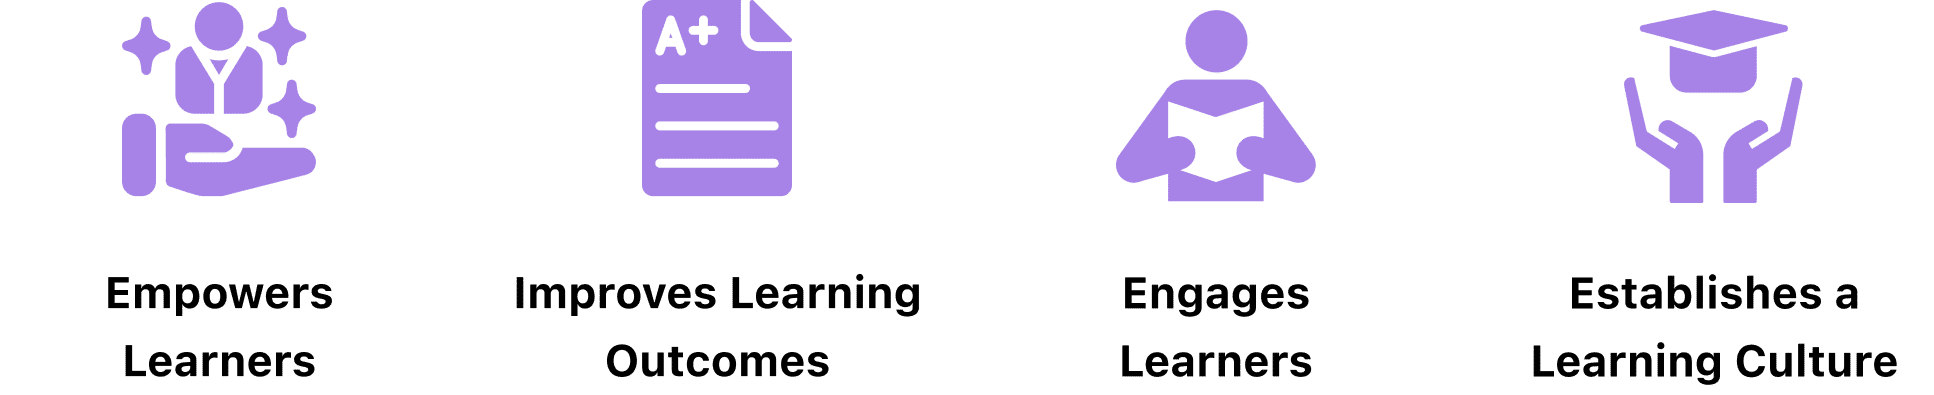 Elearning Top Benefits